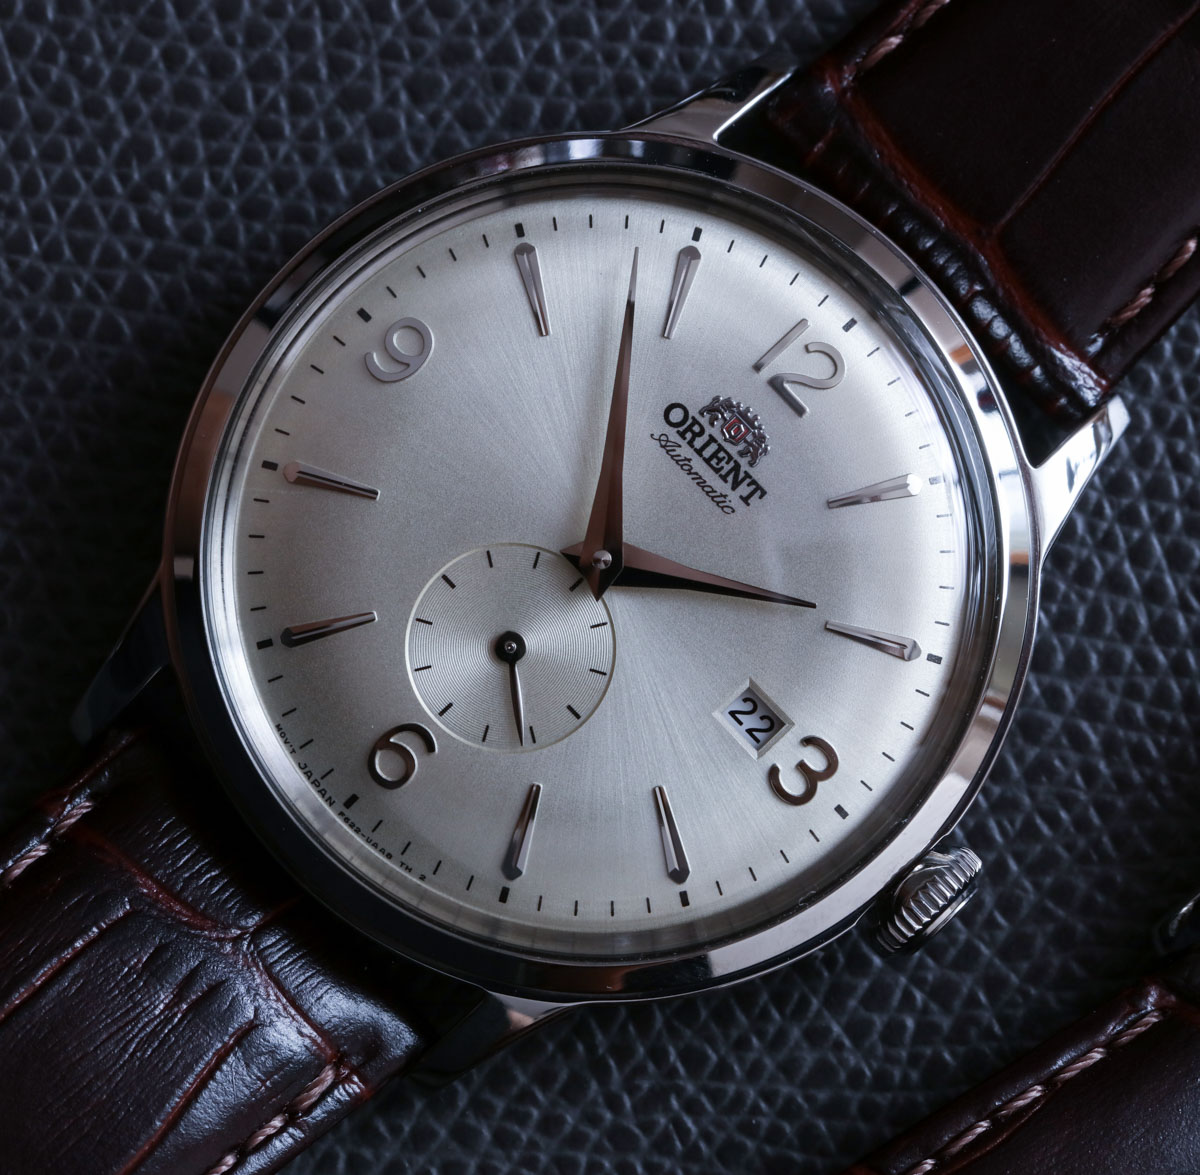 Orient Bambino Small Seconds white dial close up